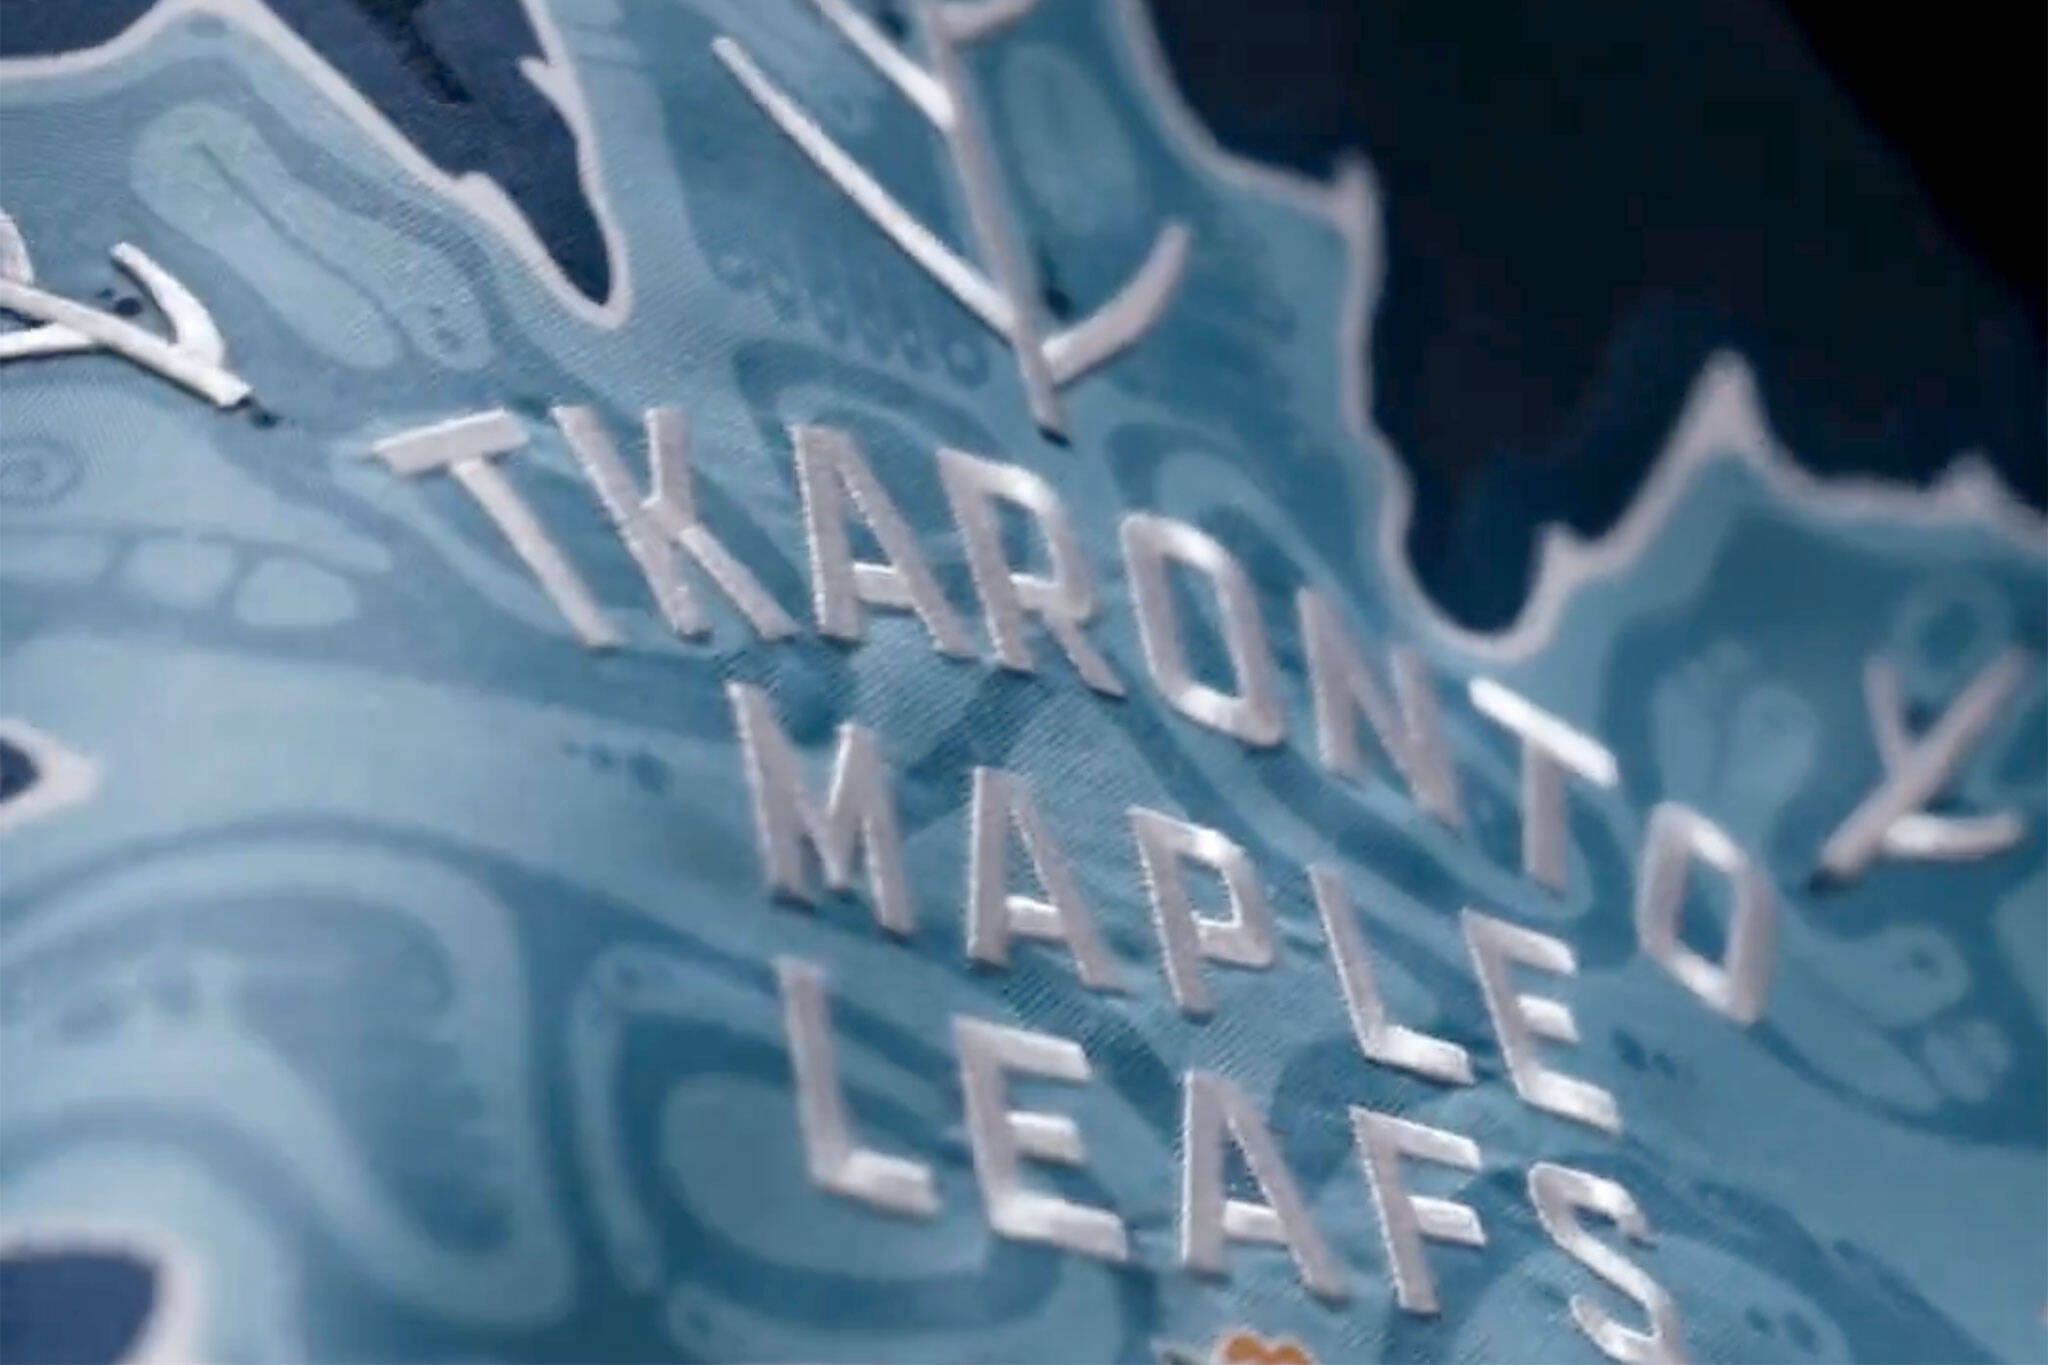 First Nations artist designed Leafs jersey for Indigenous Celebration game  